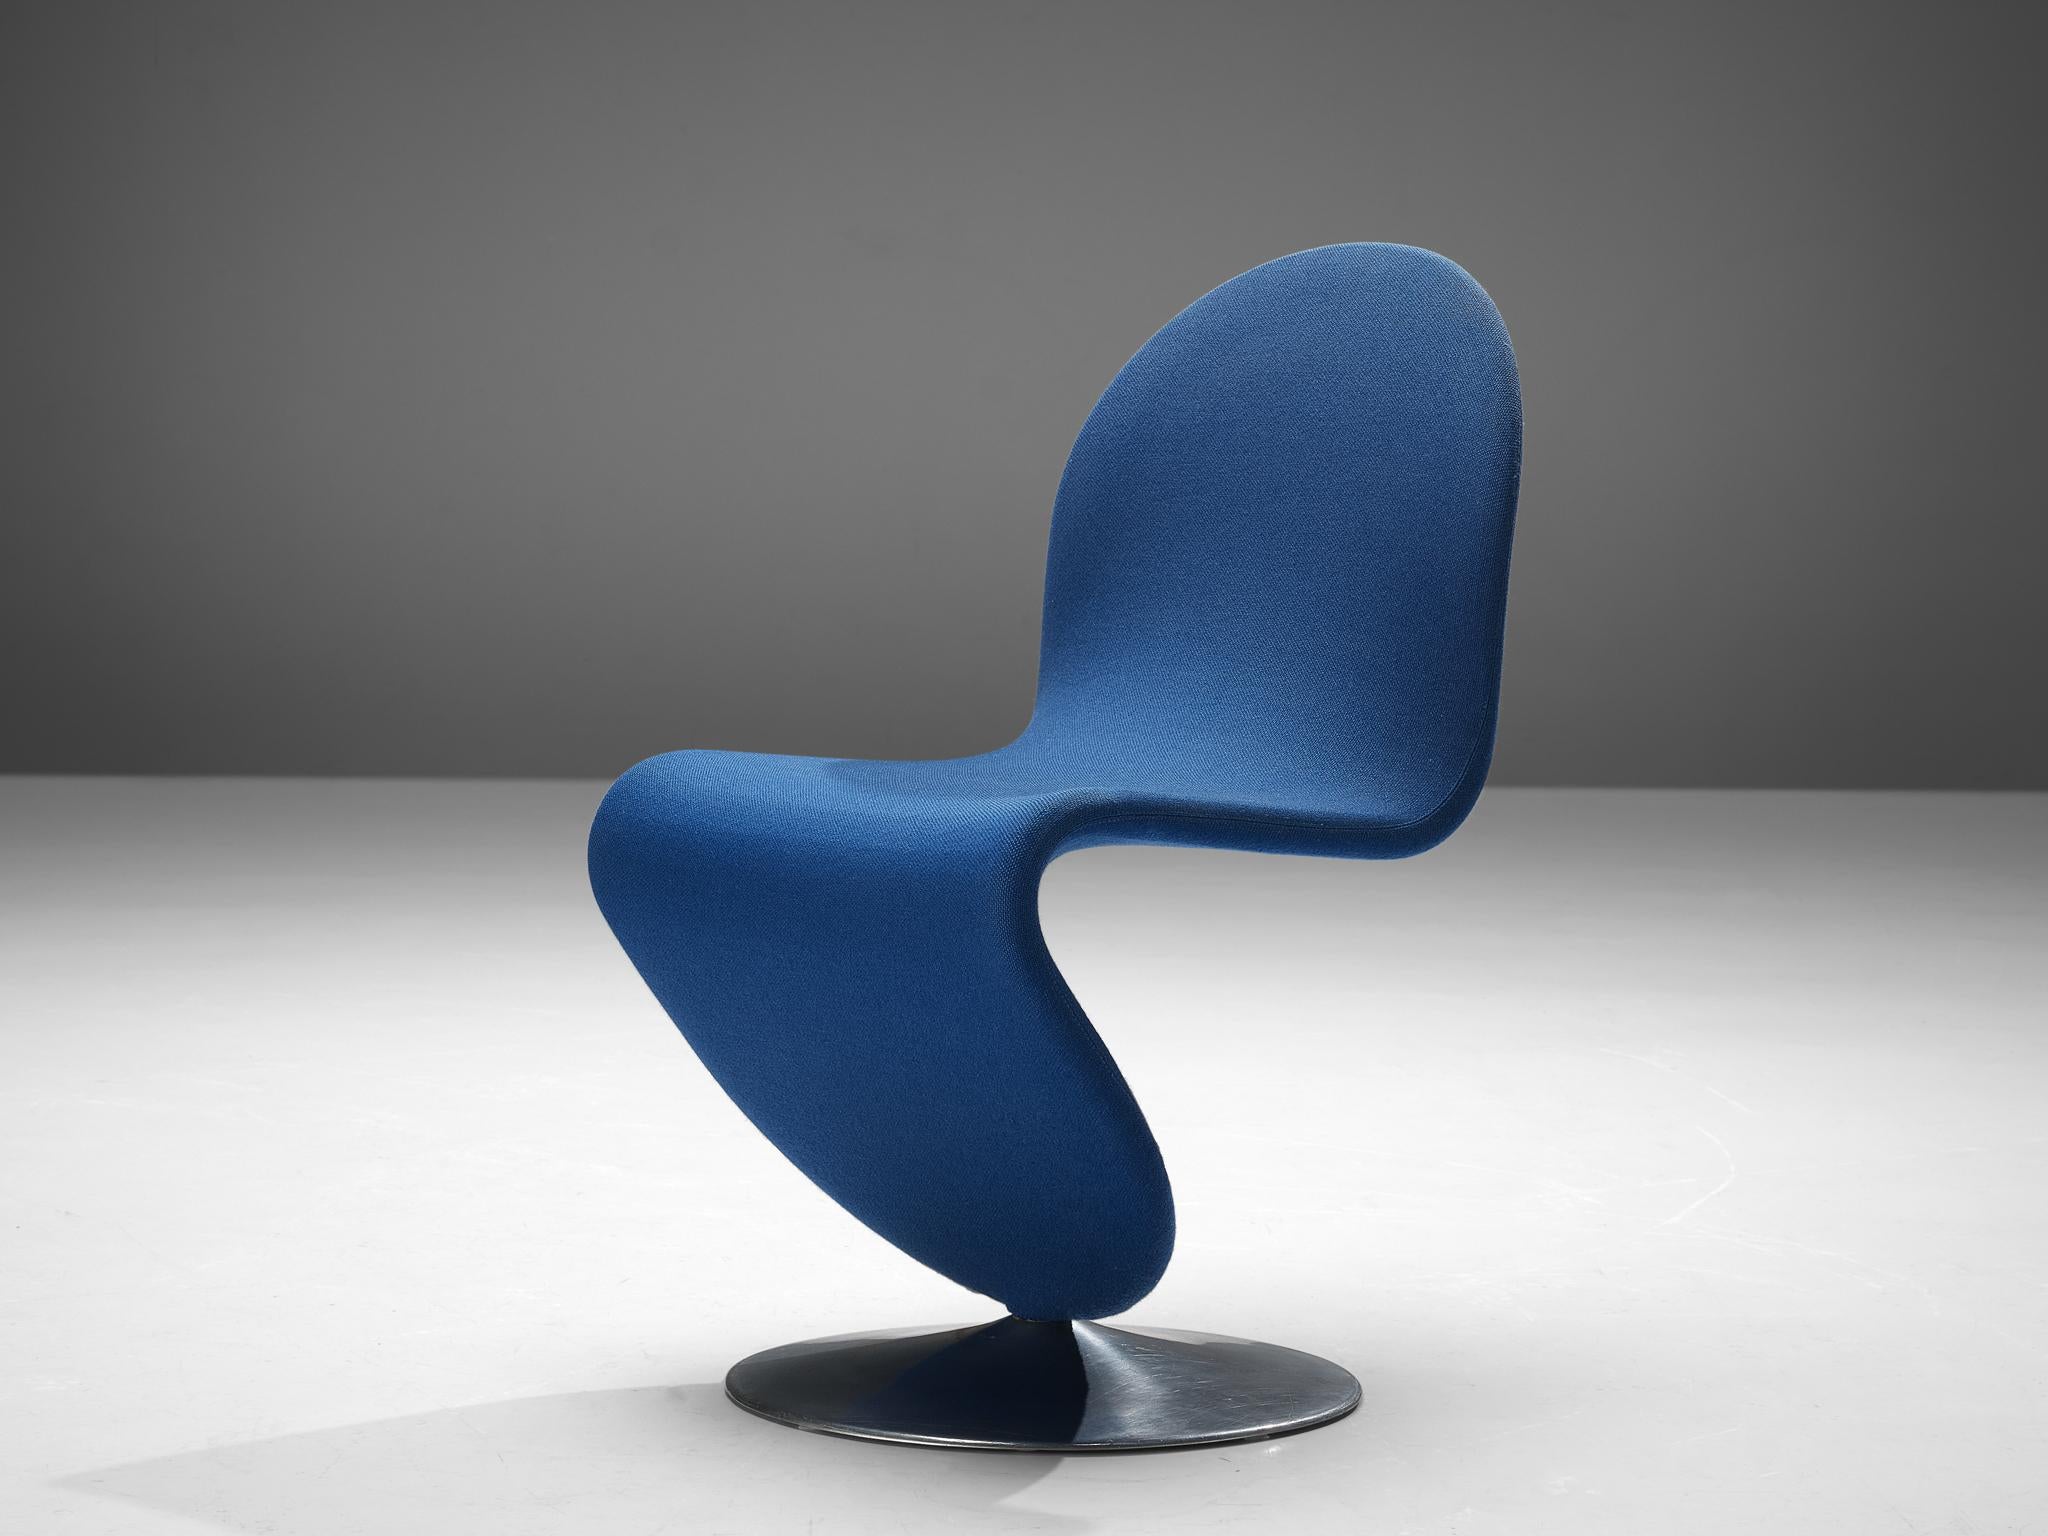 Danish Verner Panton for Fritz Hansen 'Chair a' Chair in Blue Upholstery